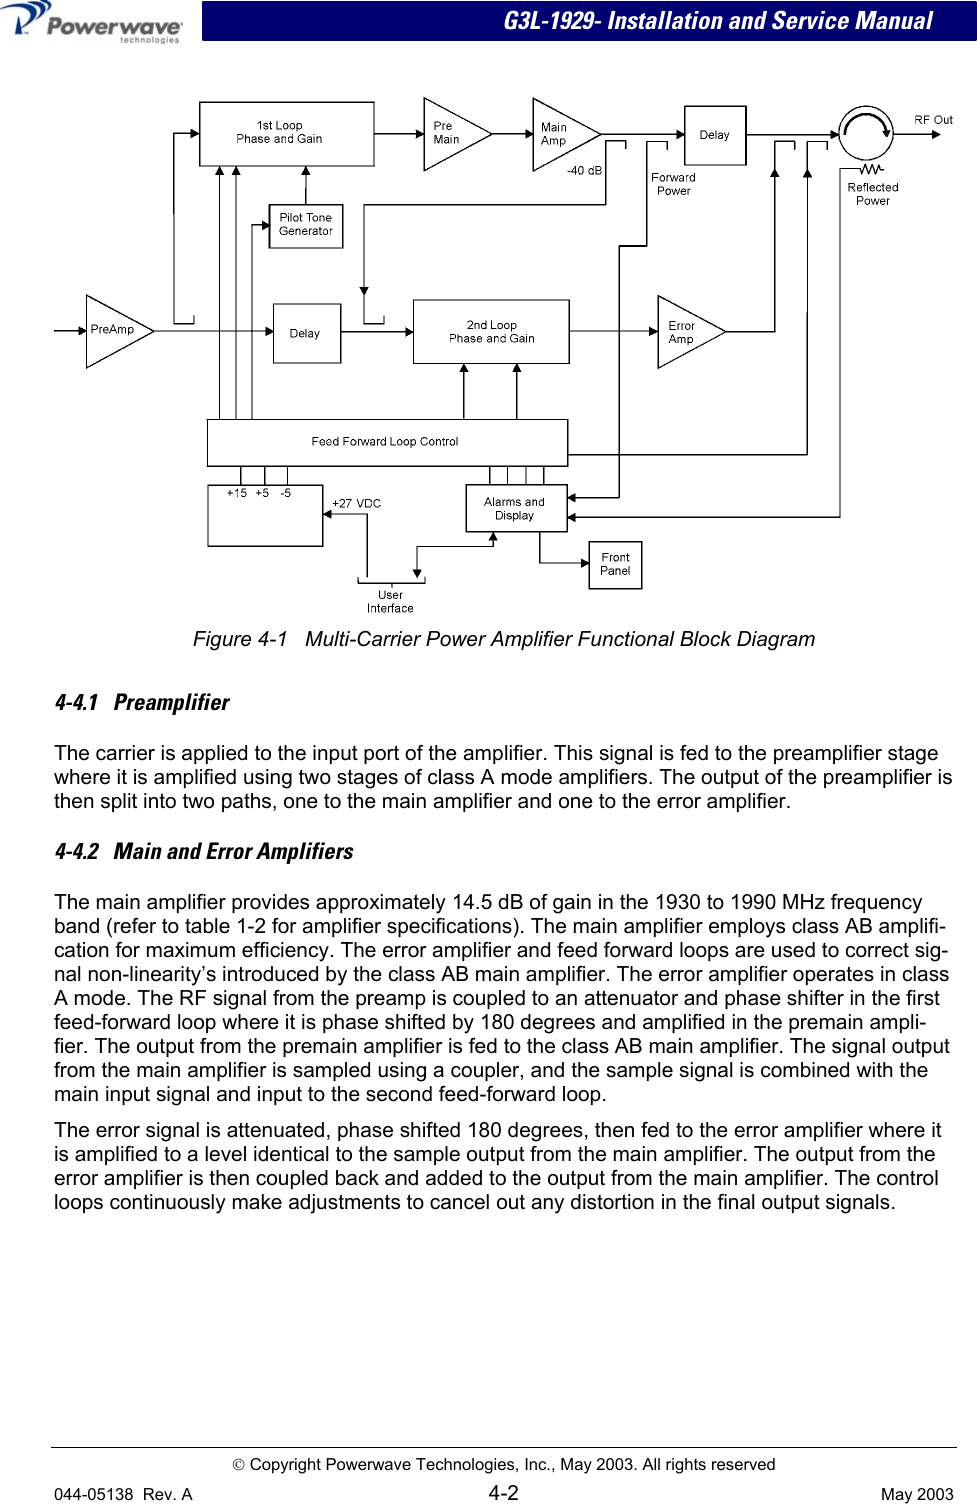  G3L-1929- Installation and Service Manual    Figure 4-1   Multi-Carrier Power Amplifier Functional Block Diagram 4-4.1   Preamplifier The carrier is applied to the input port of the amplifier. This signal is fed to the preamplifier stage where it is amplified using two stages of class A mode amplifiers. The output of the preamplifier is then split into two paths, one to the main amplifier and one to the error amplifier. 4-4.2   Main and Error Amplifiers The main amplifier provides approximately 14.5 dB of gain in the 1930 to 1990 MHz frequency band (refer to table 1-2 for amplifier specifications). The main amplifier employs class AB amplifi-cation for maximum efficiency. The error amplifier and feed forward loops are used to correct sig-nal non-linearity’s introduced by the class AB main amplifier. The error amplifier operates in class A mode. The RF signal from the preamp is coupled to an attenuator and phase shifter in the first feed-forward loop where it is phase shifted by 180 degrees and amplified in the premain ampli-fier. The output from the premain amplifier is fed to the class AB main amplifier. The signal output from the main amplifier is sampled using a coupler, and the sample signal is combined with the main input signal and input to the second feed-forward loop.  The error signal is attenuated, phase shifted 180 degrees, then fed to the error amplifier where it is amplified to a level identical to the sample output from the main amplifier. The output from the error amplifier is then coupled back and added to the output from the main amplifier. The control loops continuously make adjustments to cancel out any distortion in the final output signals.  Copyright Powerwave Technologies, Inc., May 2003. All rights reserved 044-05138  Rev. A 4-2  May 2003 